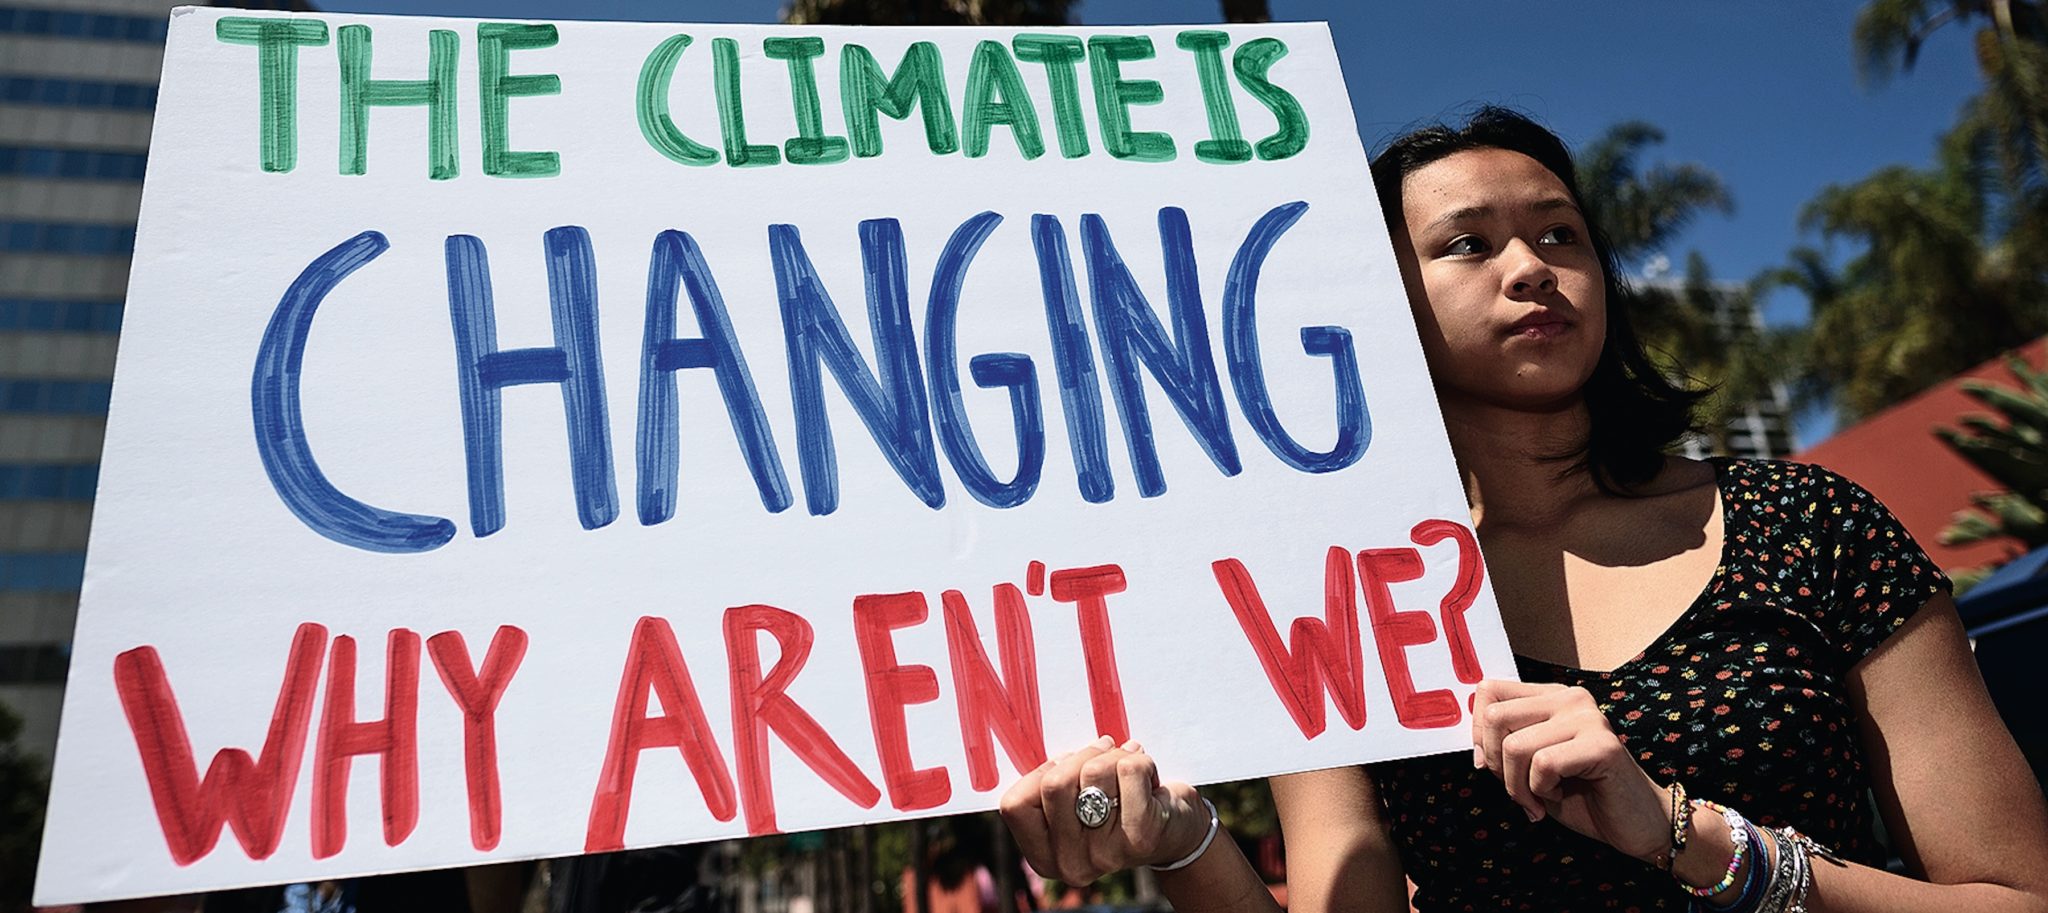 Girl holding a sign that says 'the climate is changing why aren't we?